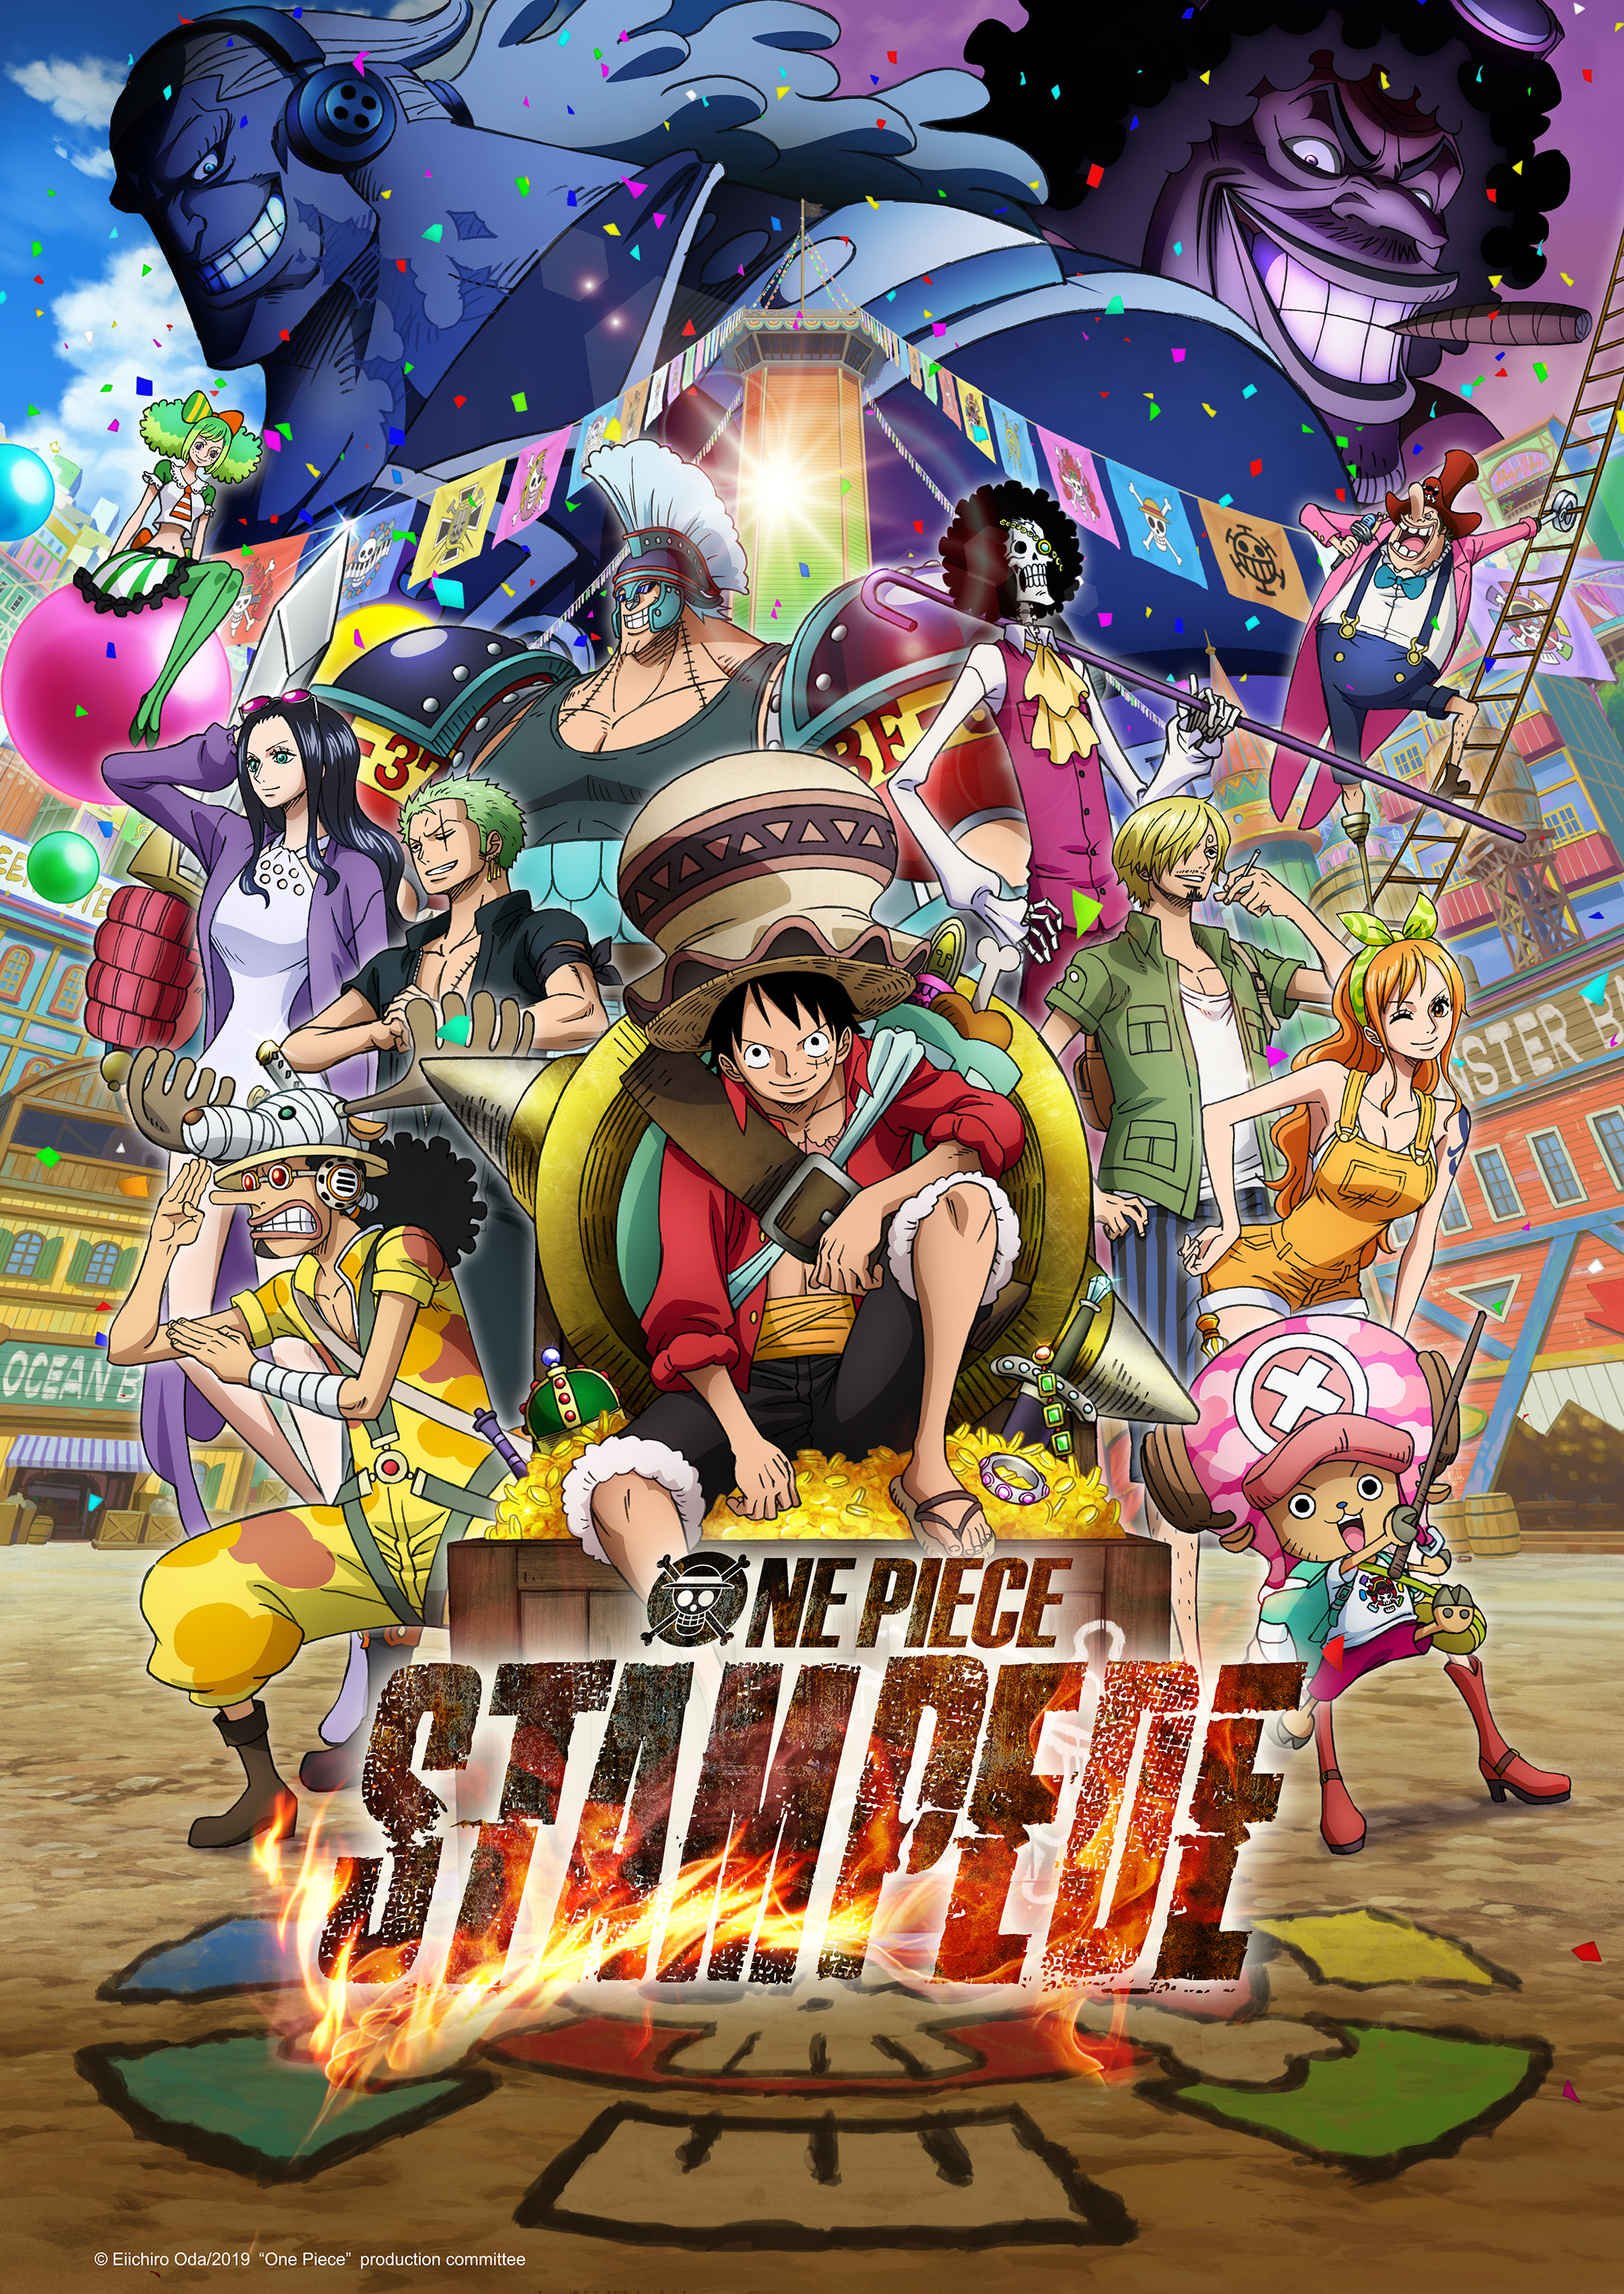 Toei Animation's One Piece Makes Franchise History with 1000th Episode  Set to Premiere November 20 on Funimation - Licensing International